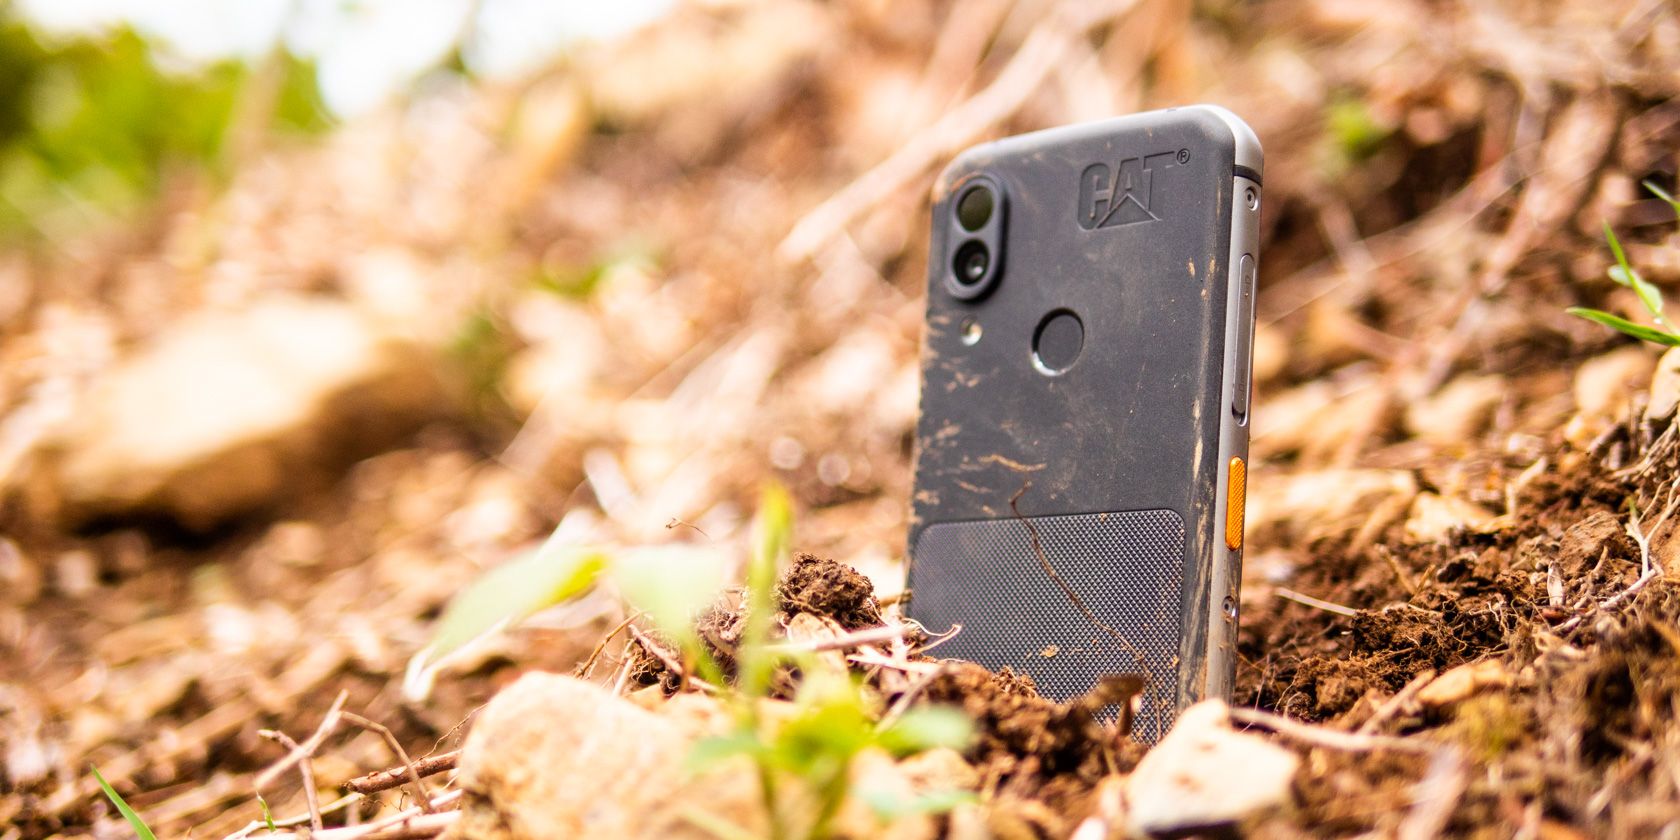 CAT S62 Pro This Rugged Smartphone Hides an Amazing Superpower